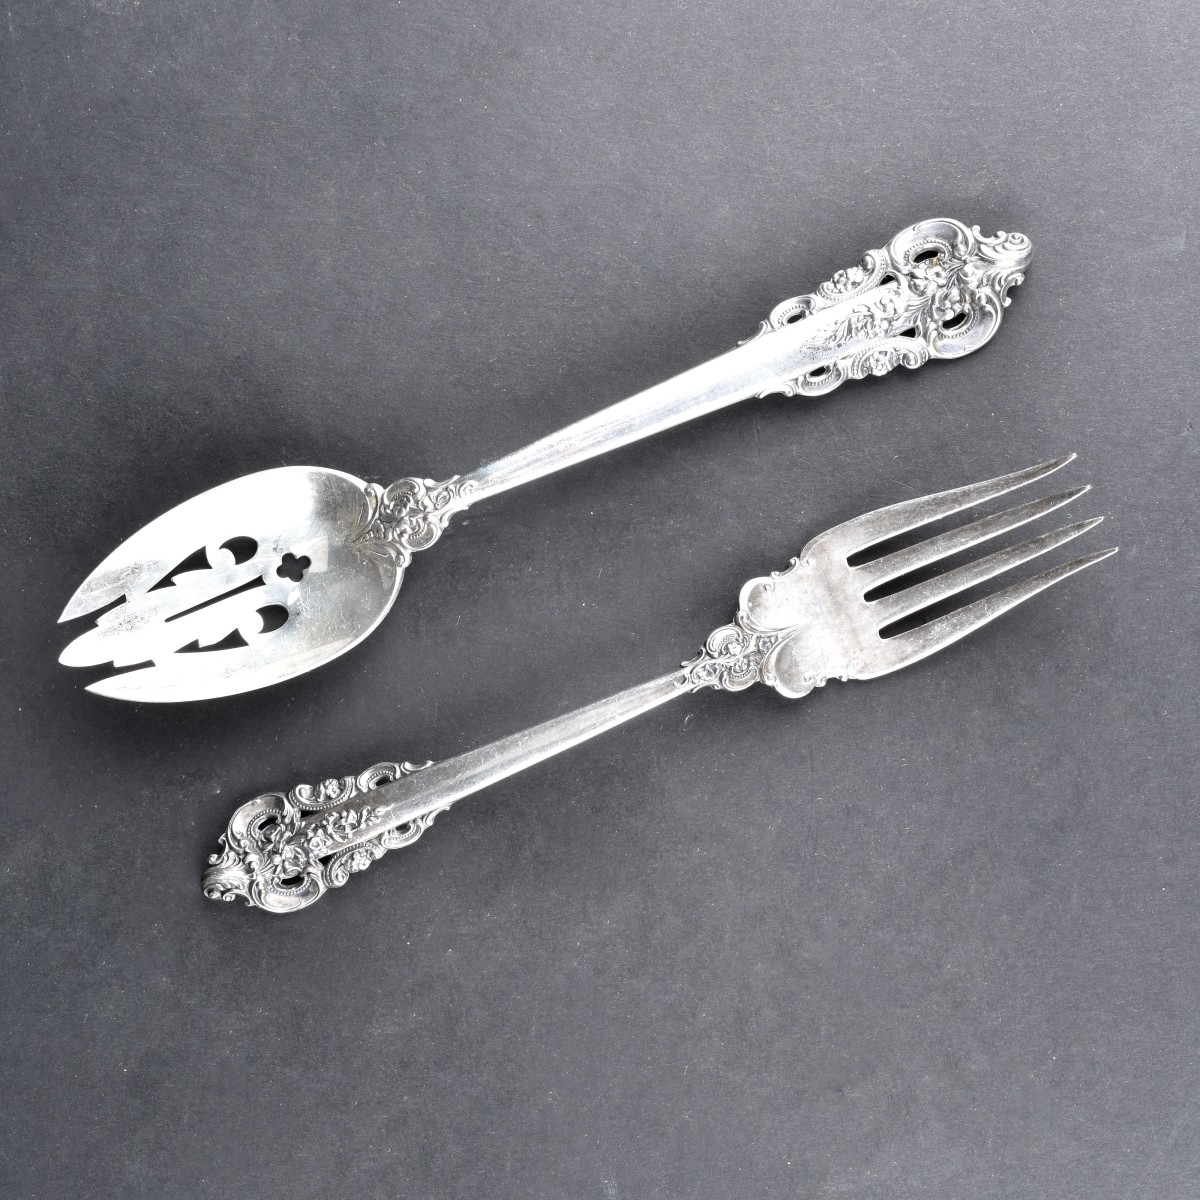 61 Wallace Grand Baroque Sterling Flatware Set